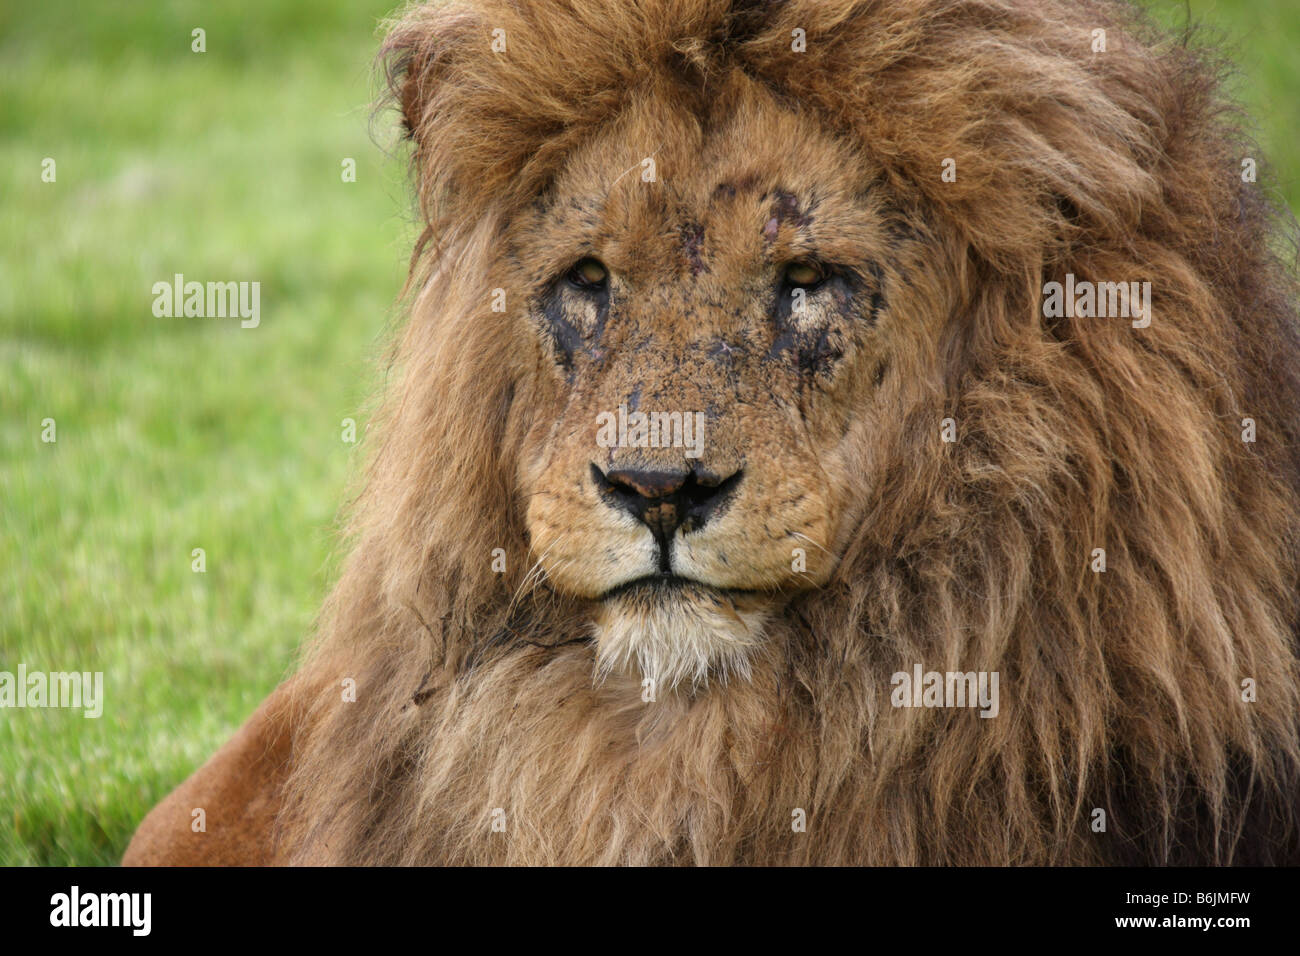 Old lion with scarred face Stock Photo